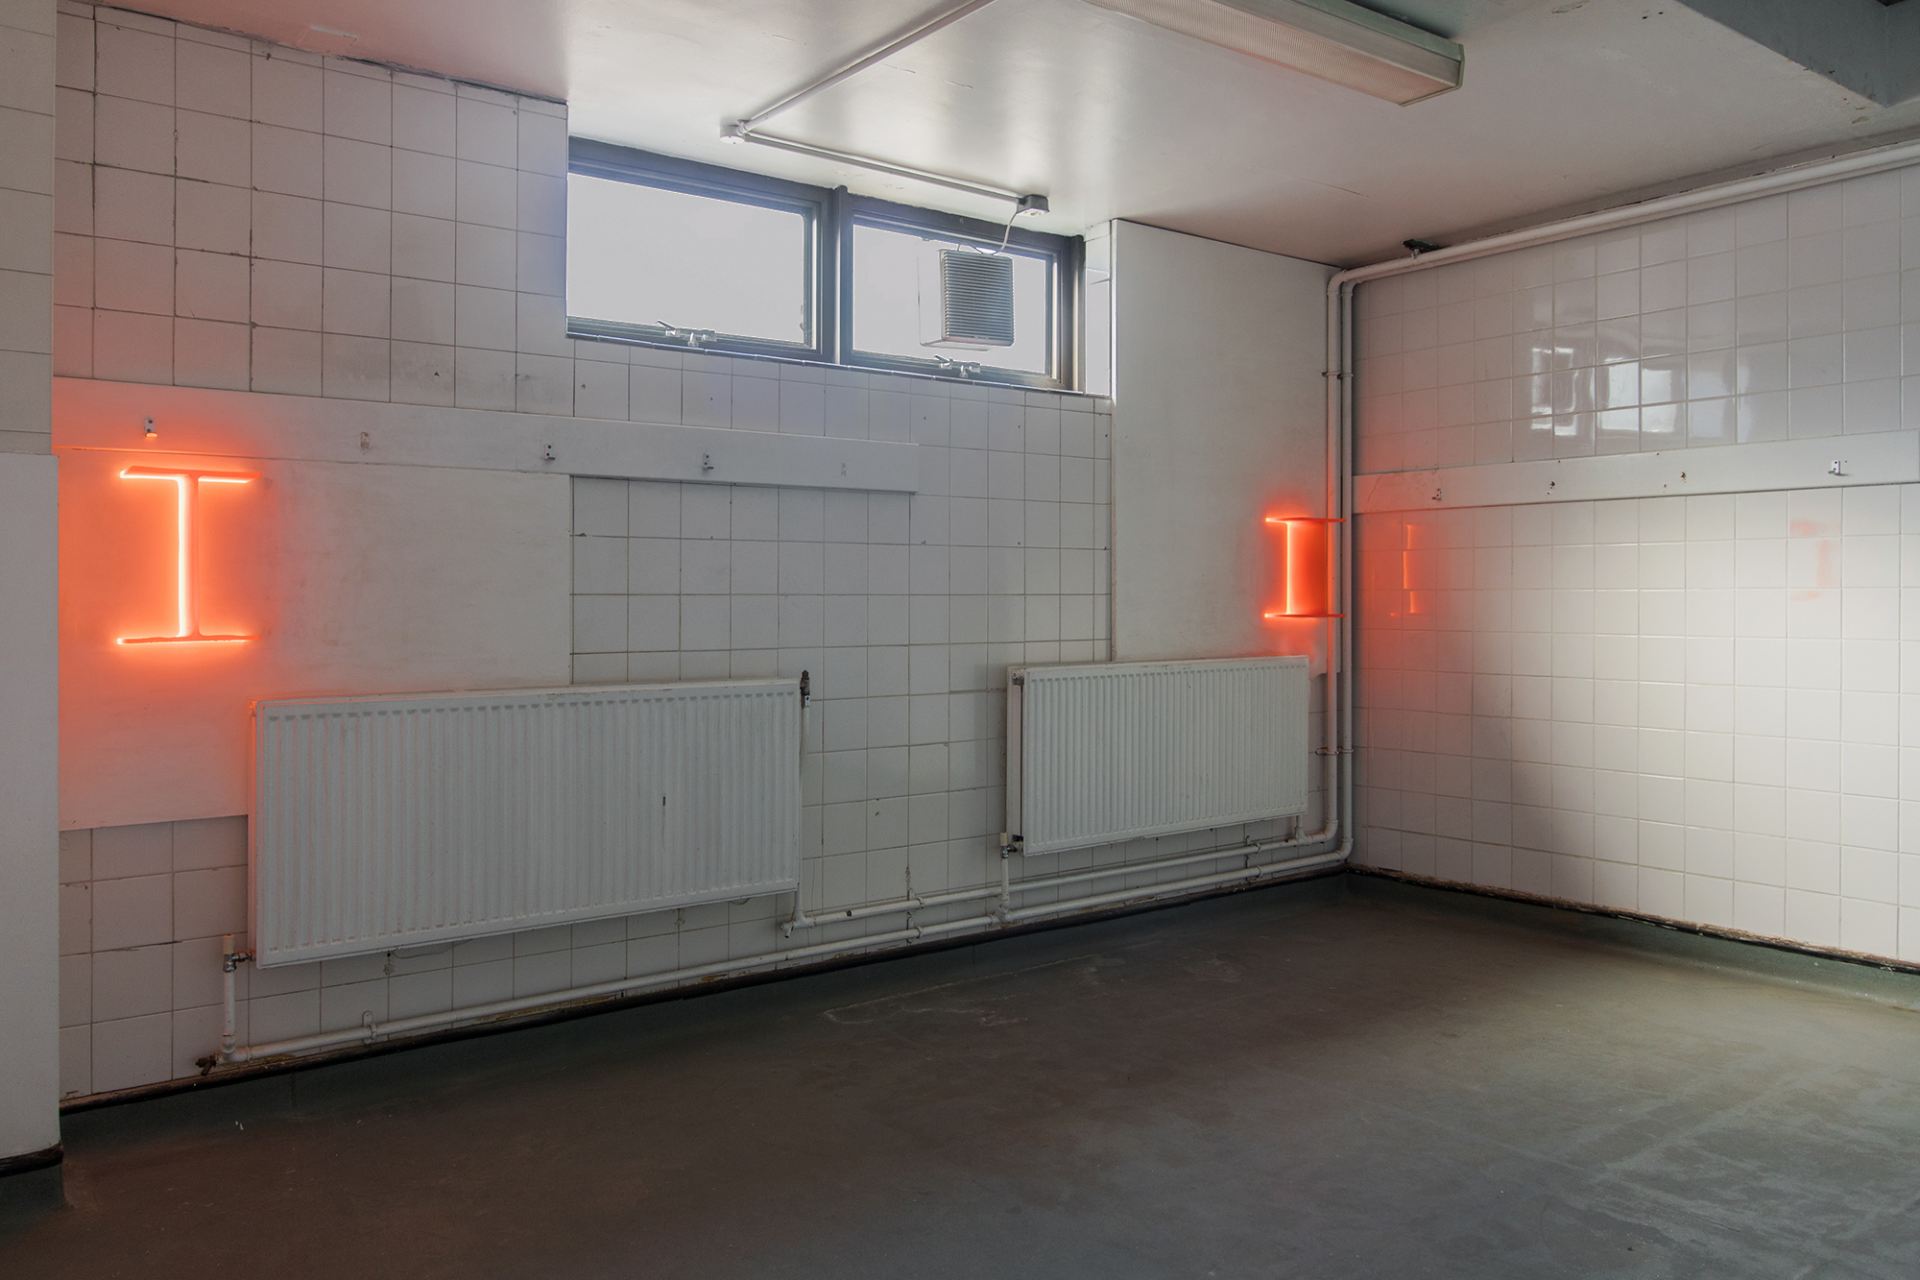 Installation views of glowing red I-beams perming the walls of a bathroom.